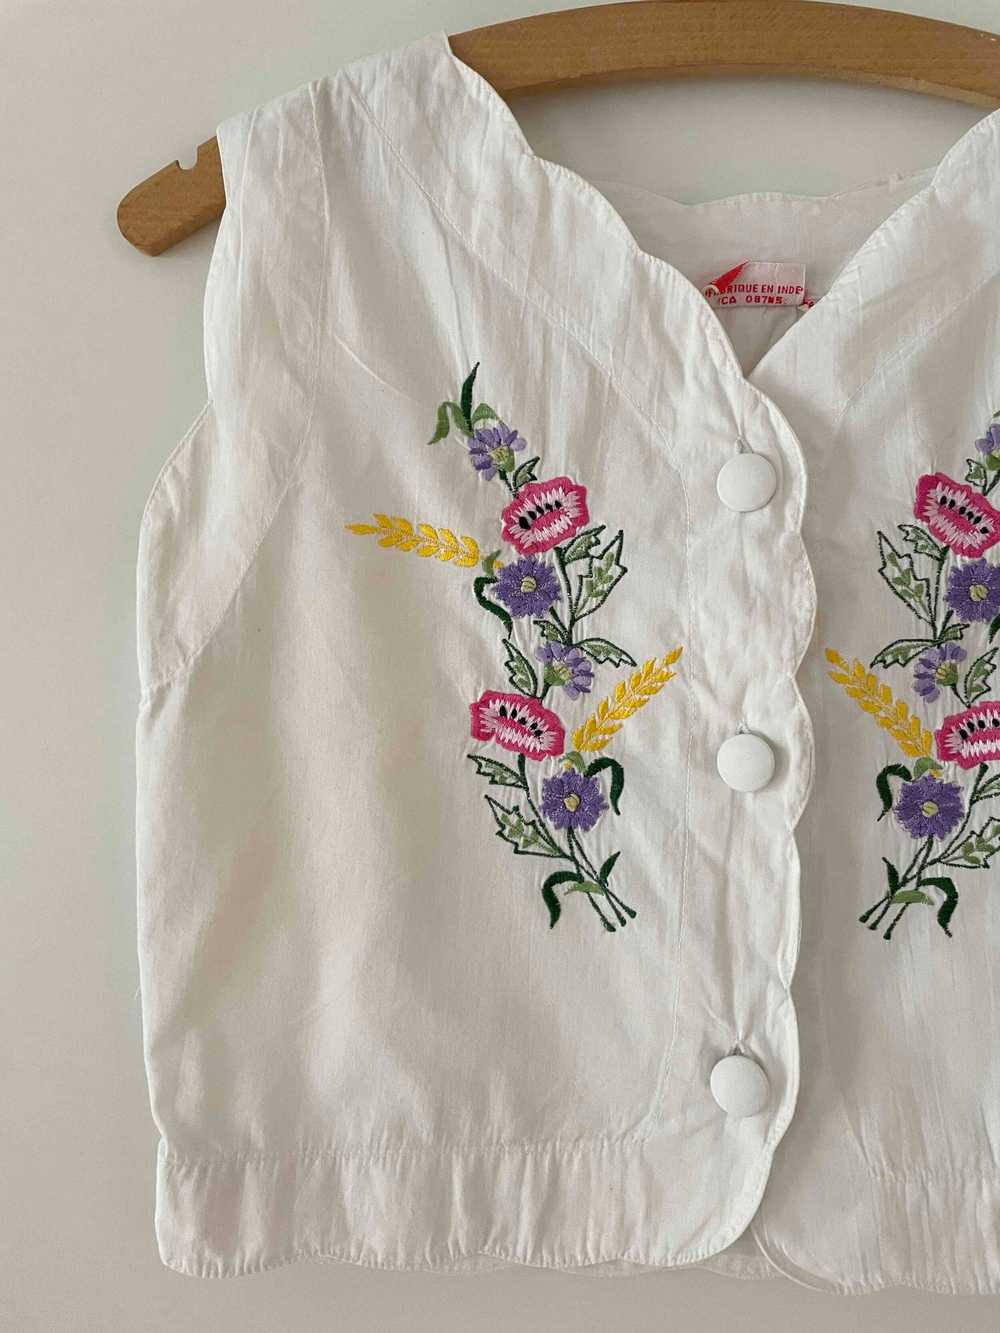 Cotton top - Top embroidered flowers Tank top / C… - image 2